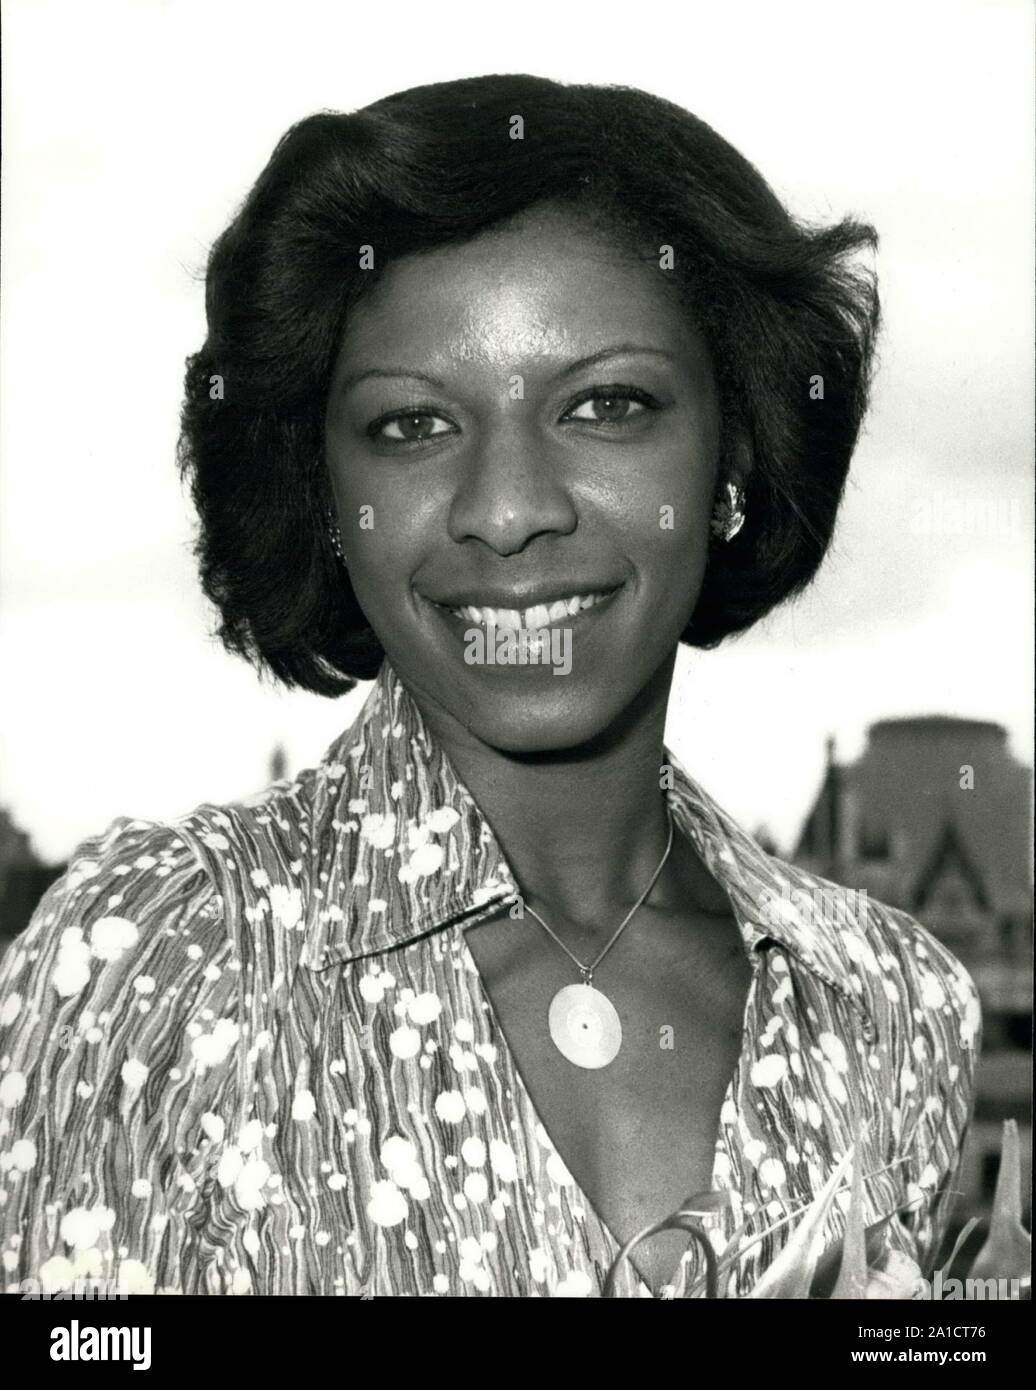 Sep. 29, 1976 - London, England, United Kingdom - NATALIE COLE, 26, is in  London to make her British concert debut. Natalie, winner of two Grammies  at the 1976 Awards presentations, including